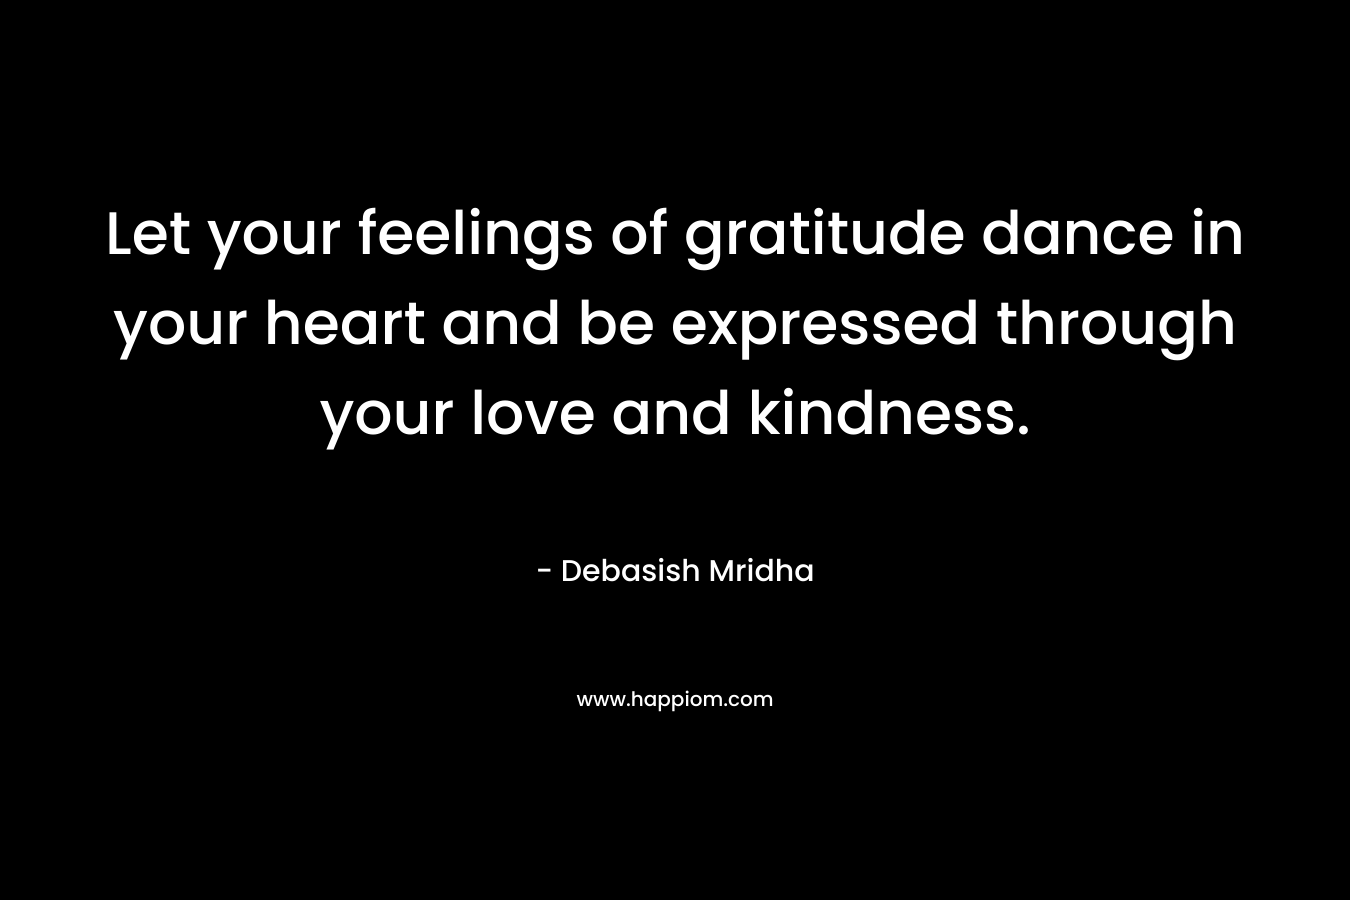 Let your feelings of gratitude dance in your heart and be expressed through your love and kindness.